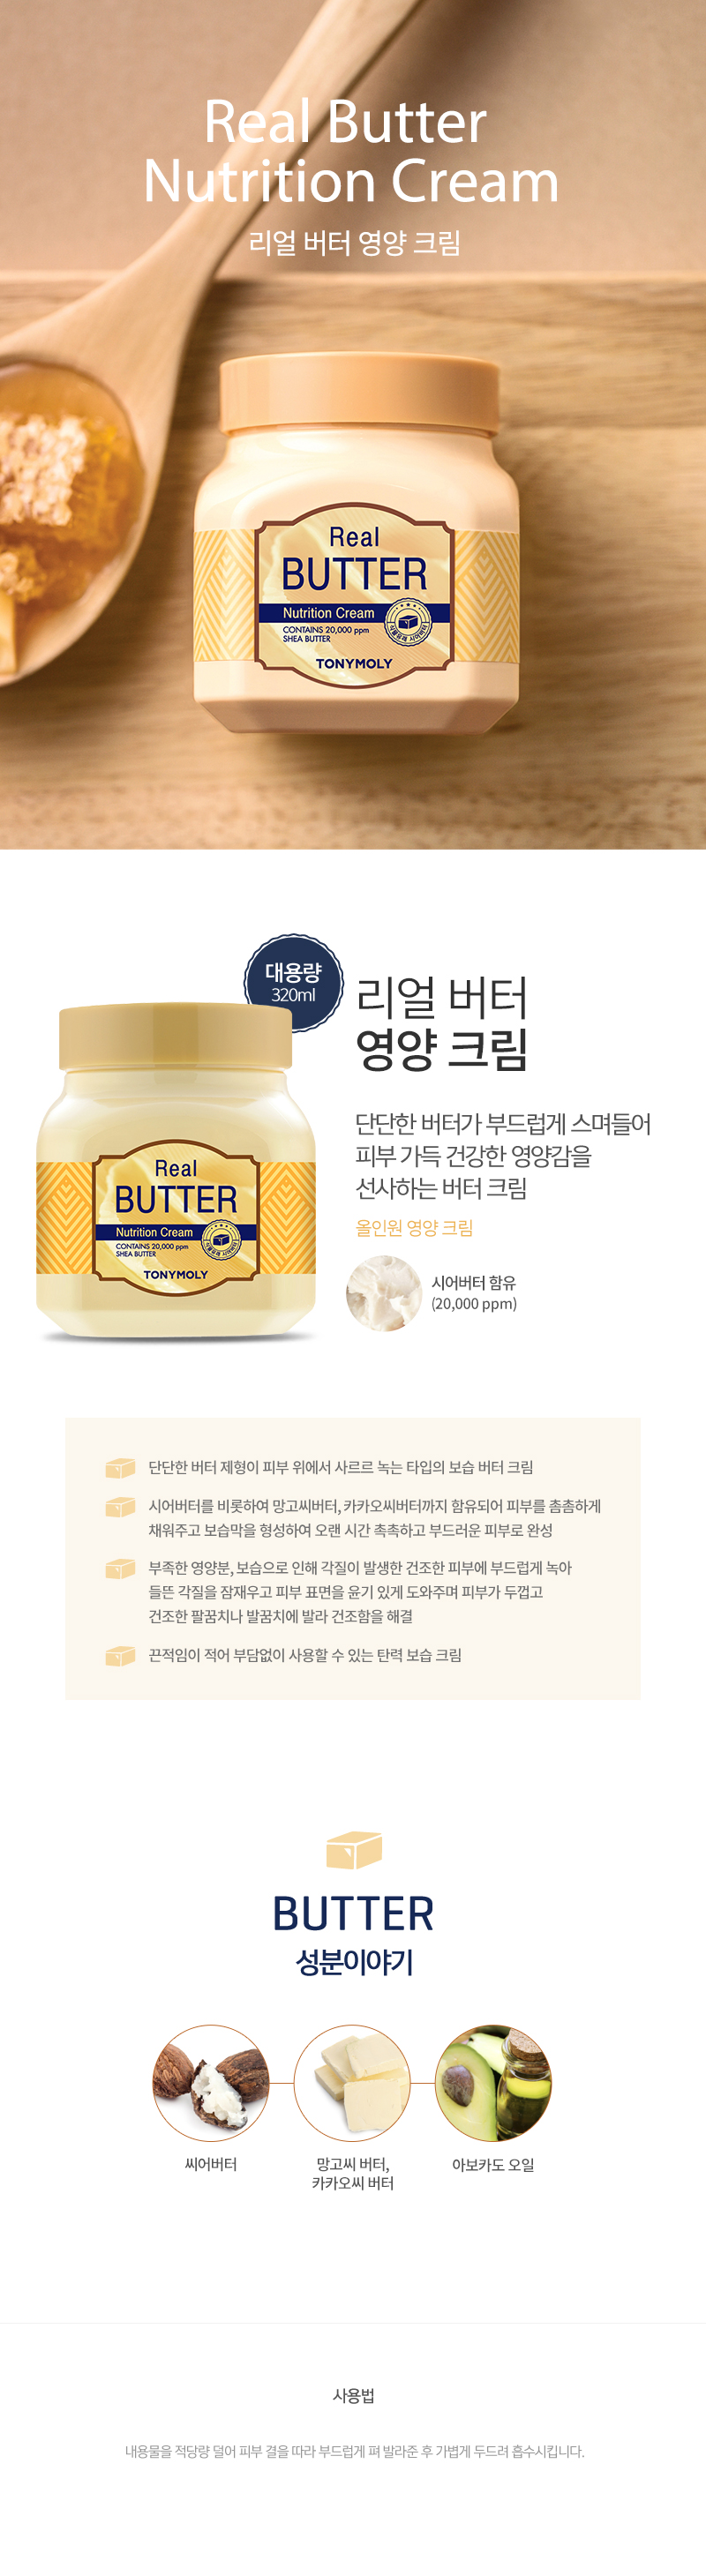 Real Butter Nutrition Cream